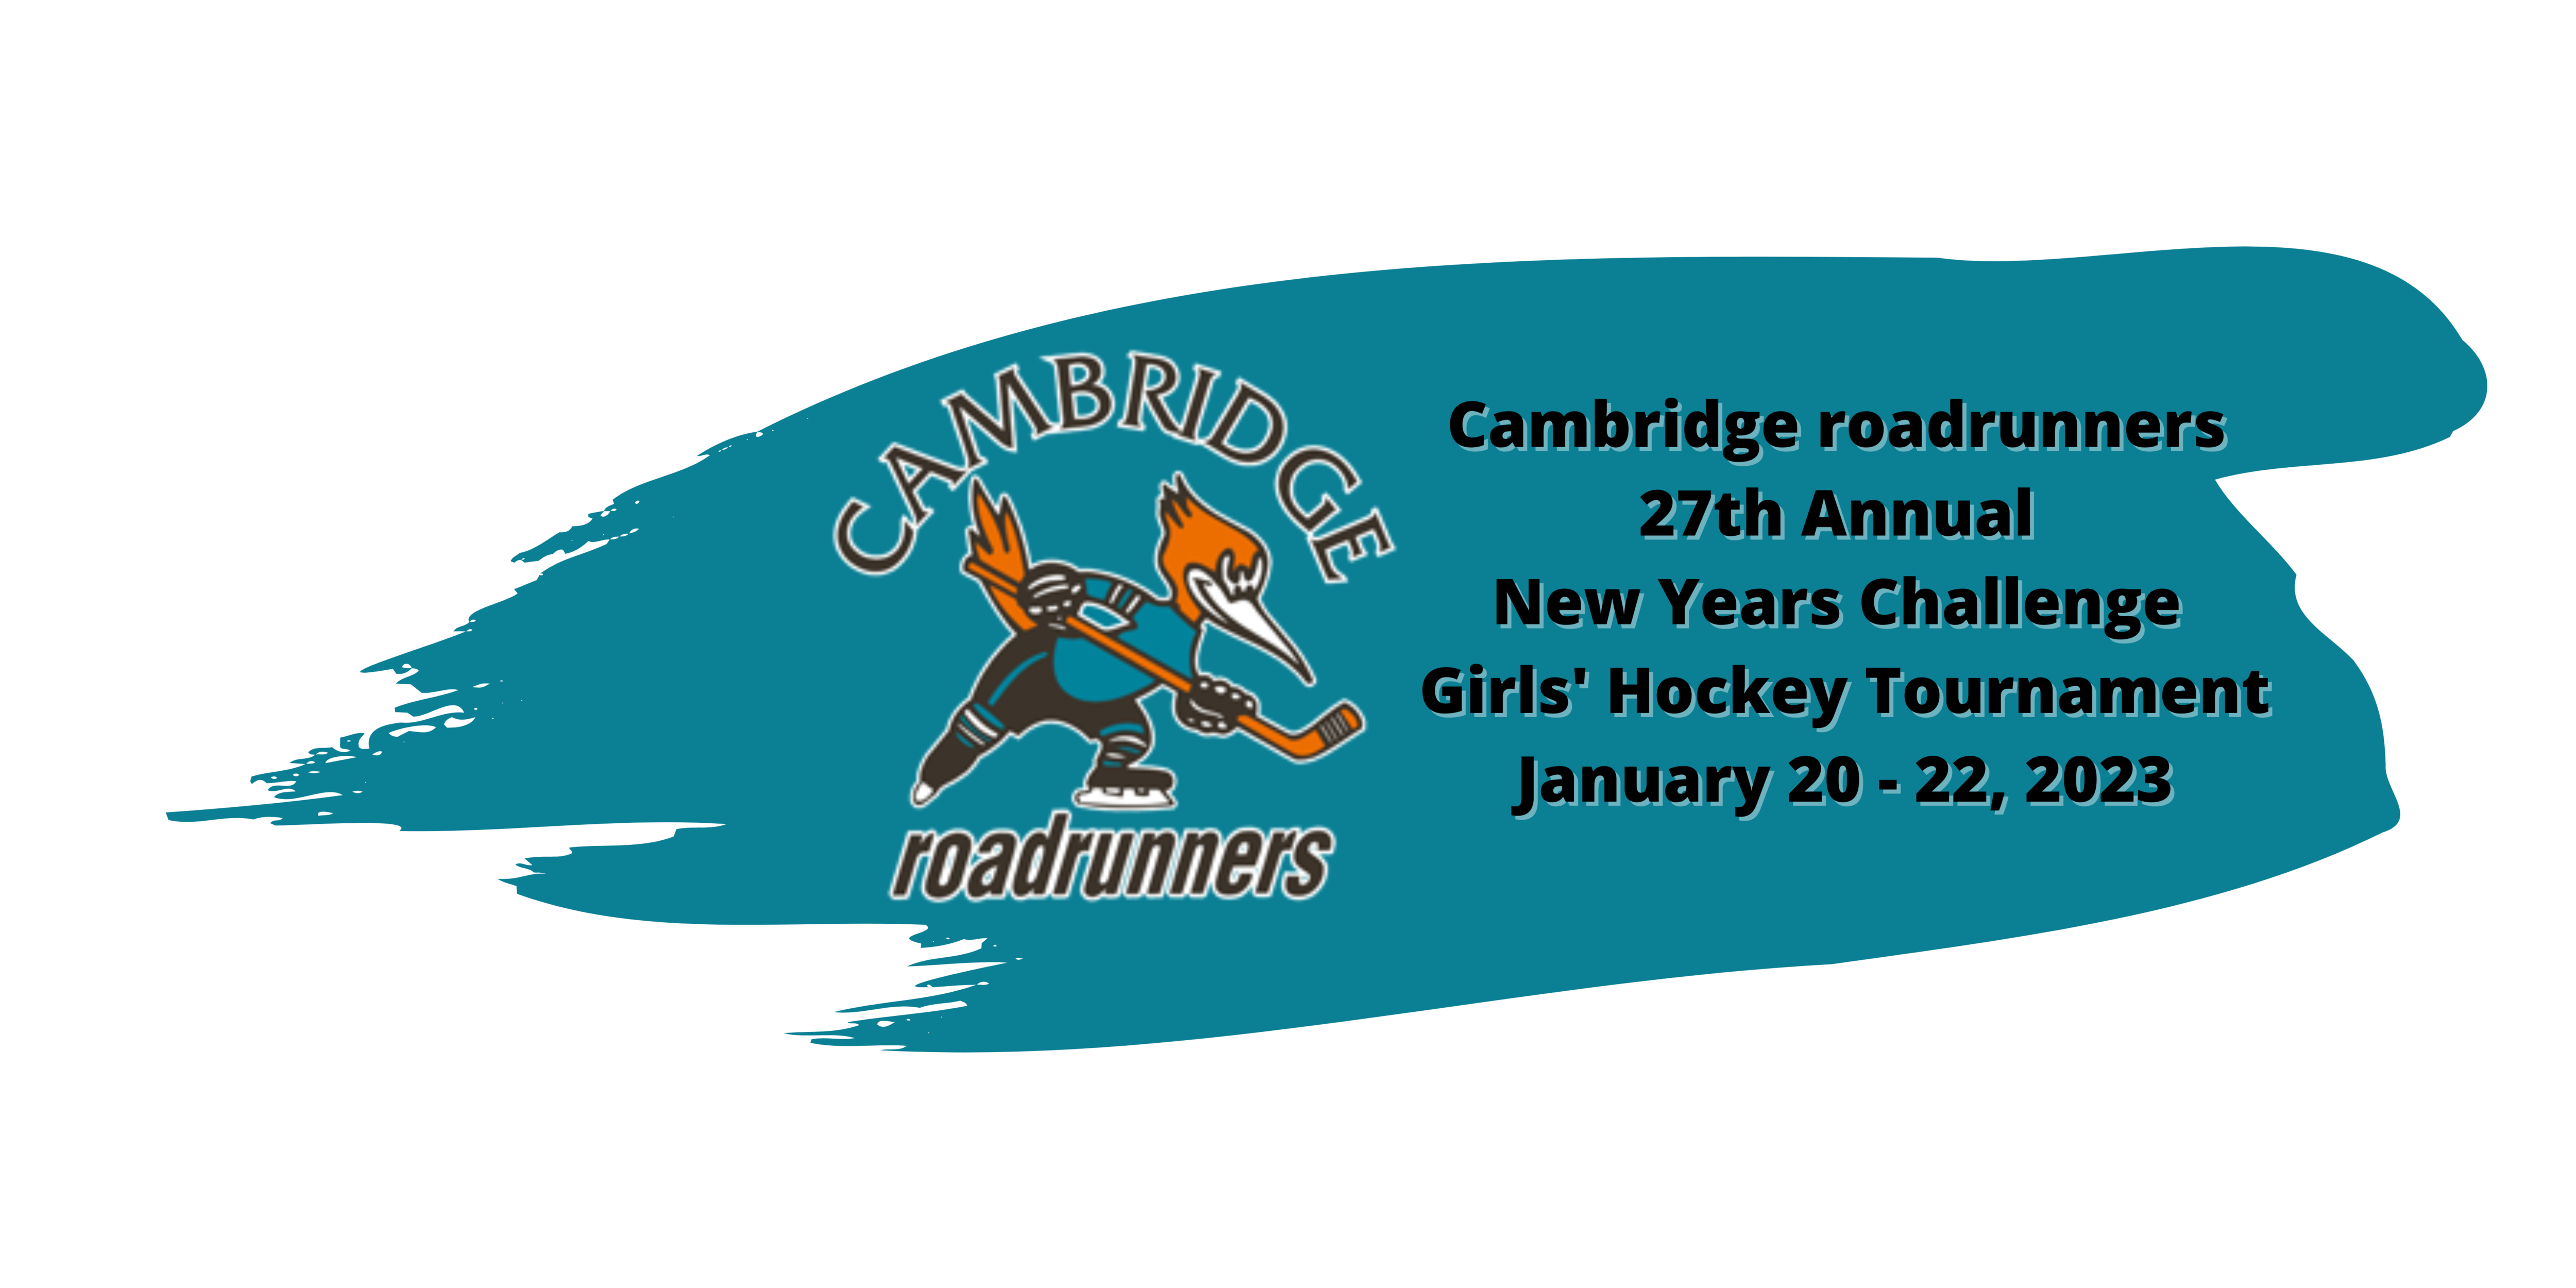 Cambridge_roadrunners_27th_Annual_New_Years_Challenge_Girls_Hockey_Tournament_2022.png